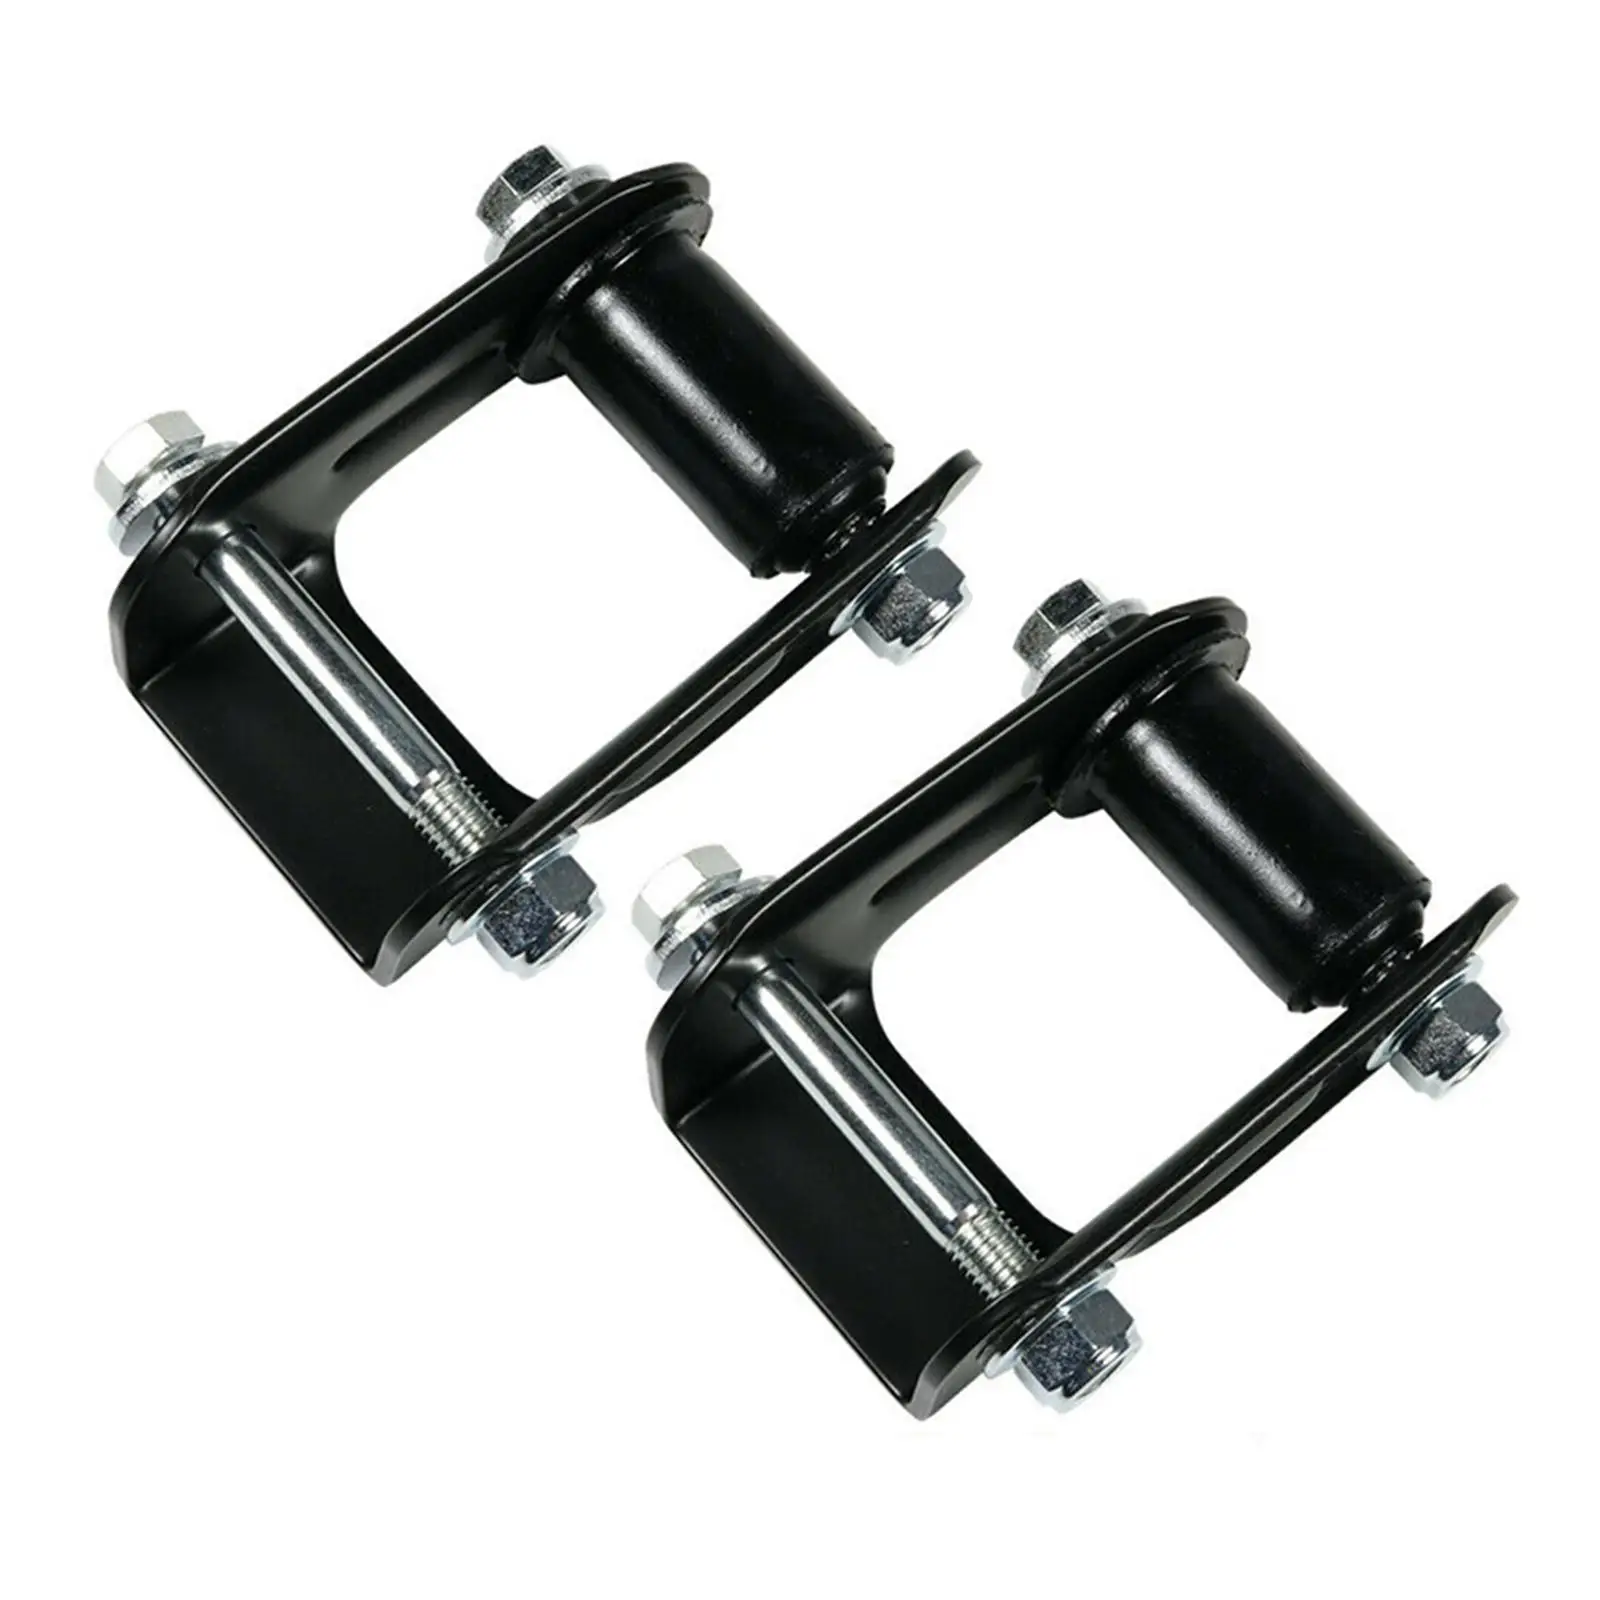 2x Rear Leaf Spring Shackle Kit Glossy Appearance Professional Fine Surface Processing Easy to Mount Replaces for Chevrolet